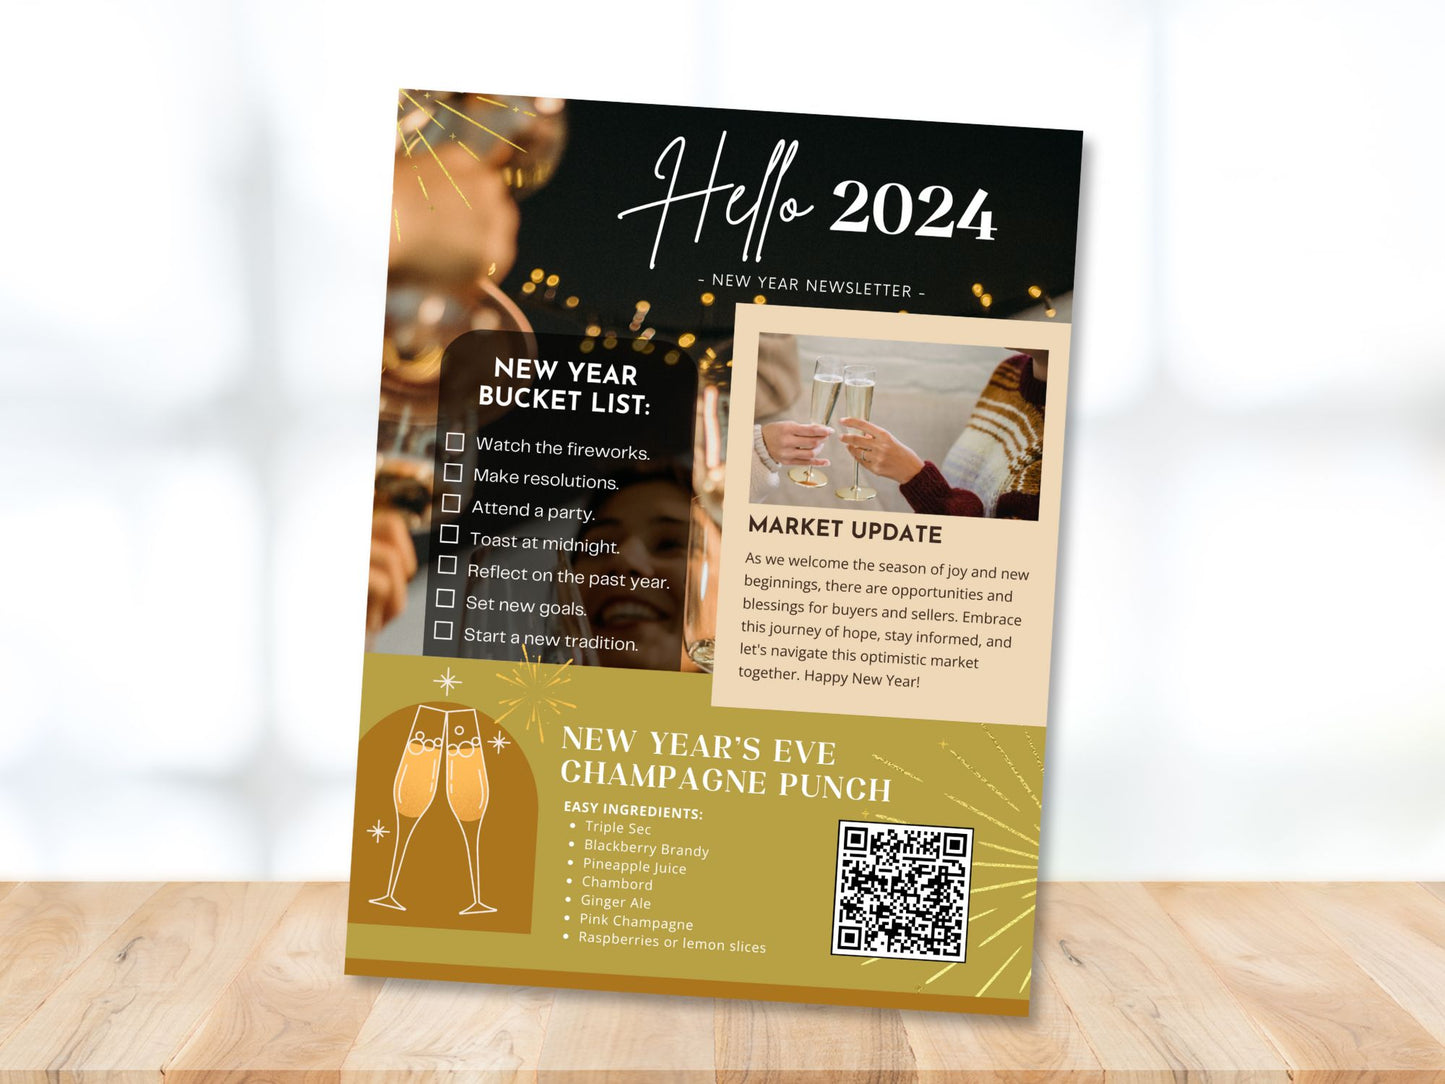 Real Estate New Year Newsletter 2024: Sharing Real Estate Insights and Celebrating the New Year with Clients and the Community